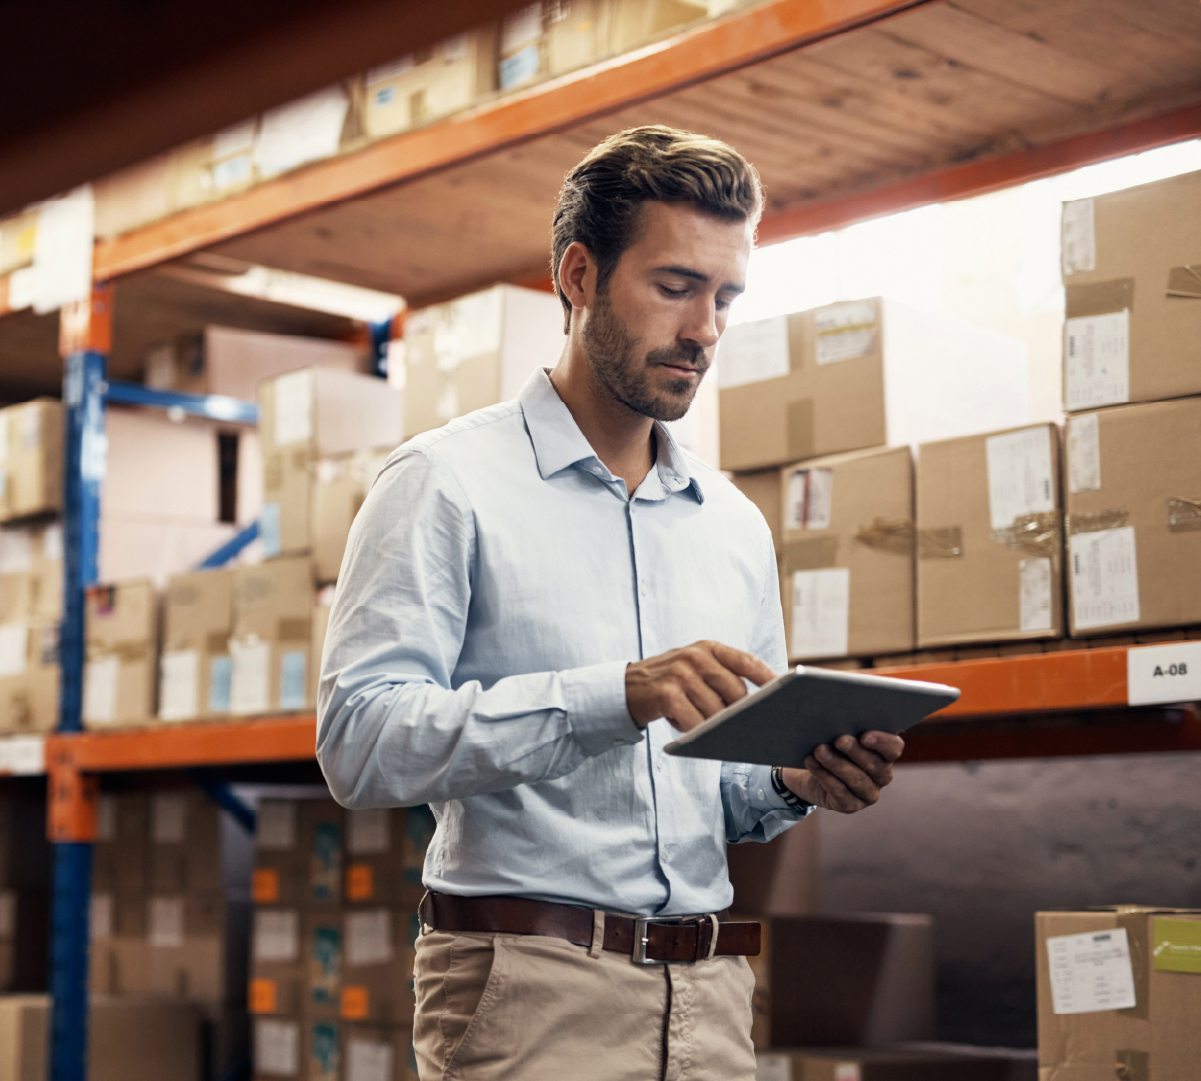 Man in warehouse using tablet – shelves of boxes in background.